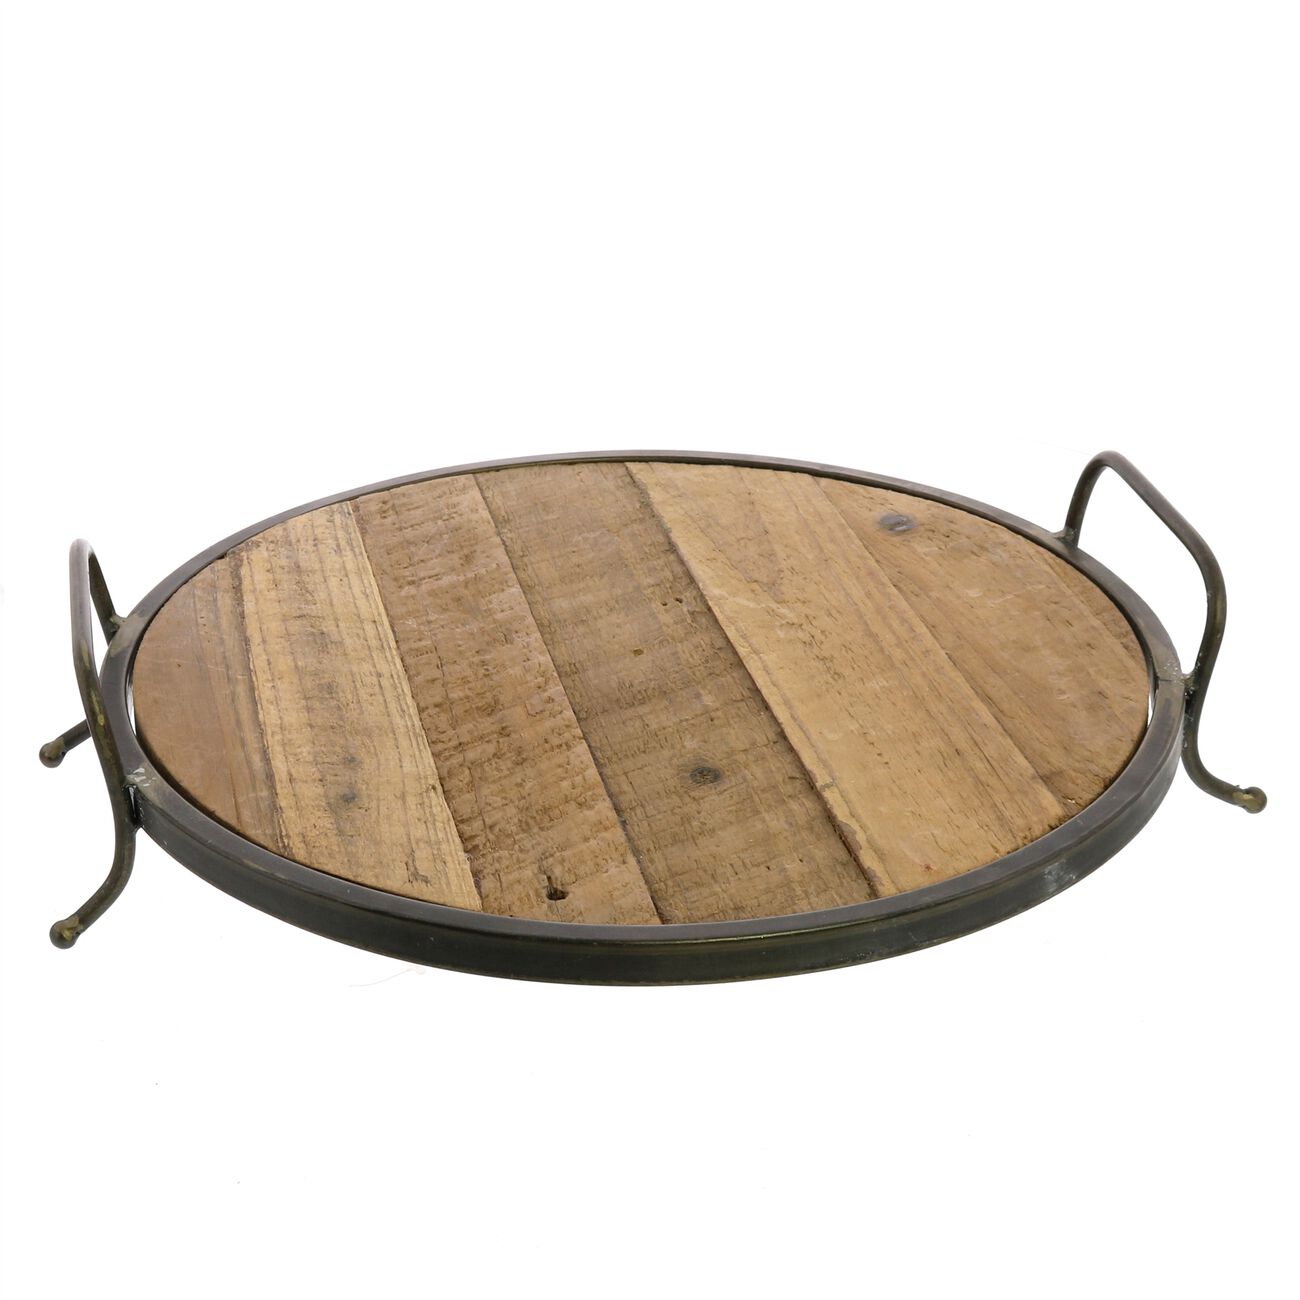 Wood and Metal Round Tray with Sturdy Handles, Black and Brown